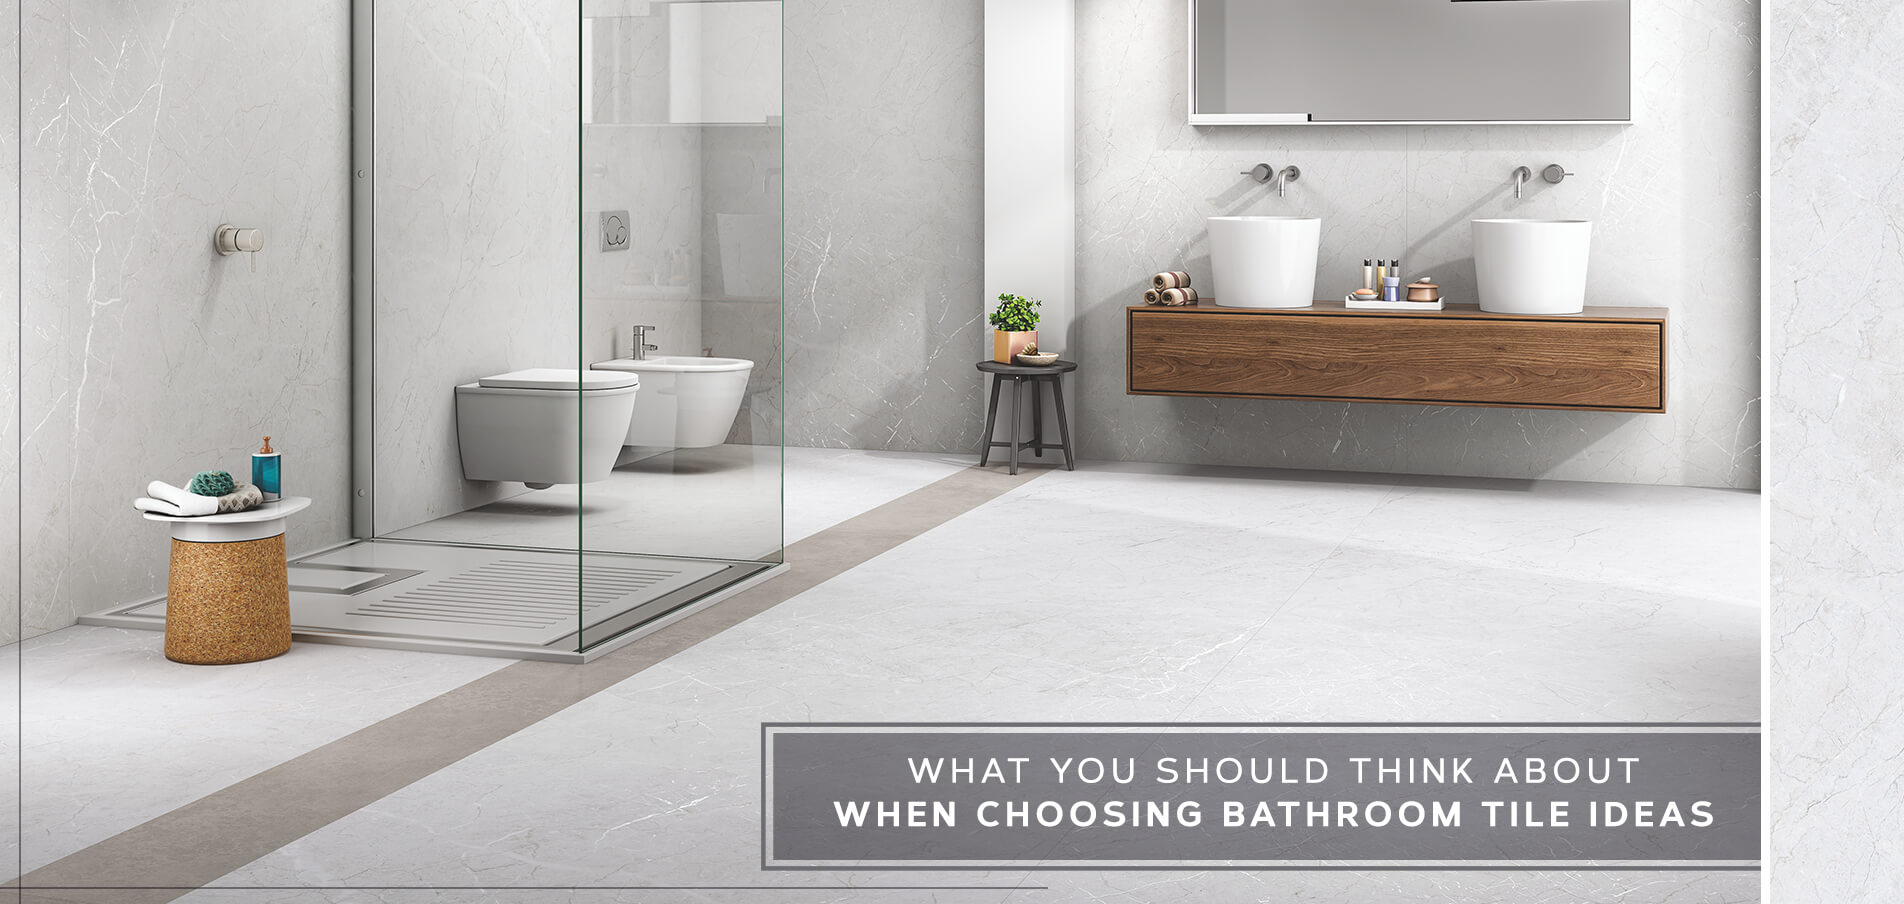 Choosing Bathroom Tile Ideas: What You Should Think About